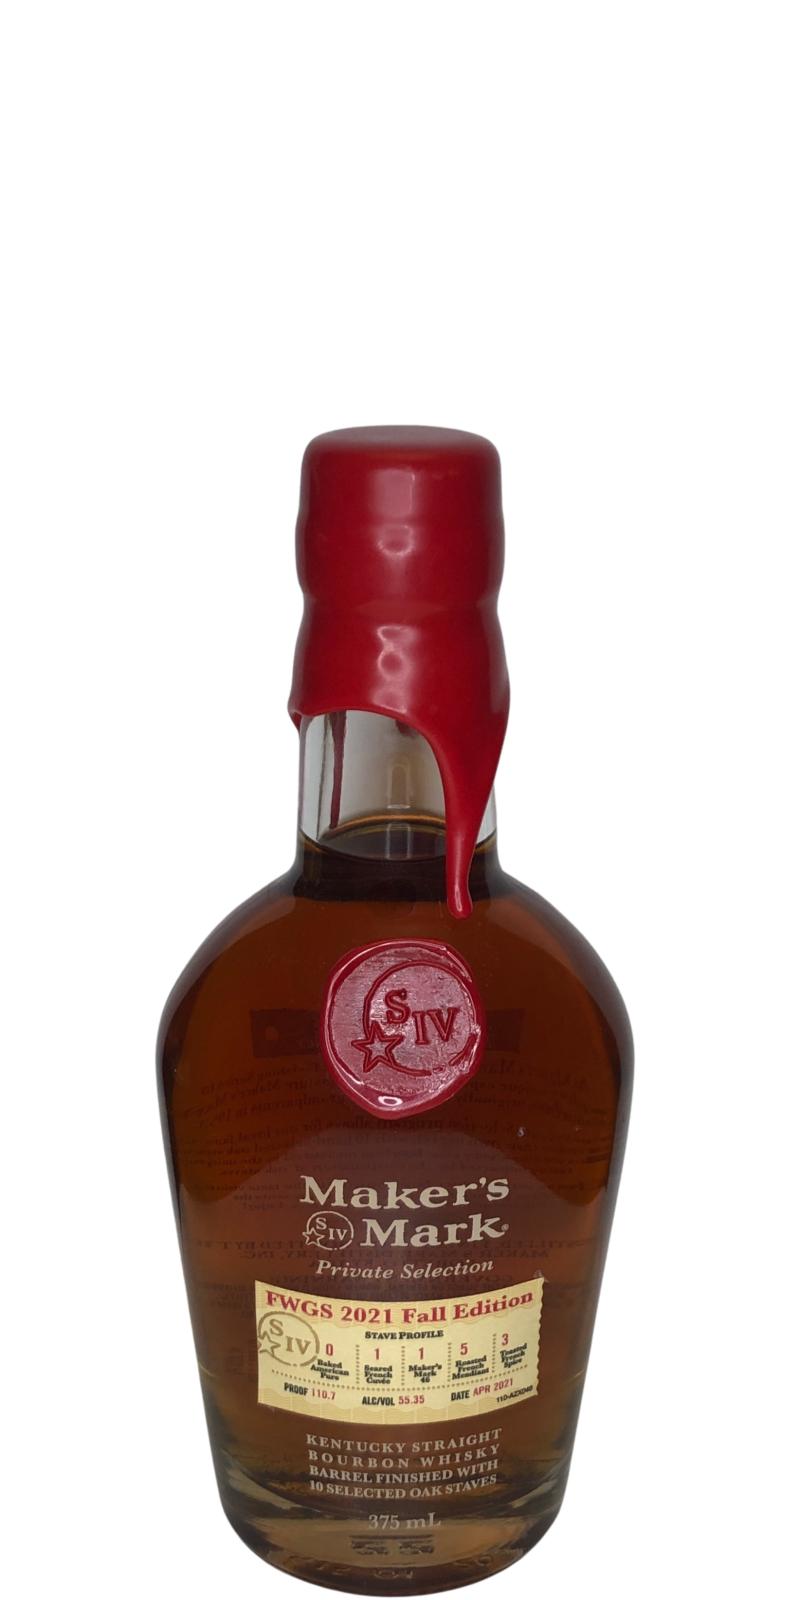 Maker's Mark Private Selection FWGS 2021 Fall Edition Fine Wine & Good Spirits 55.35% 375ml